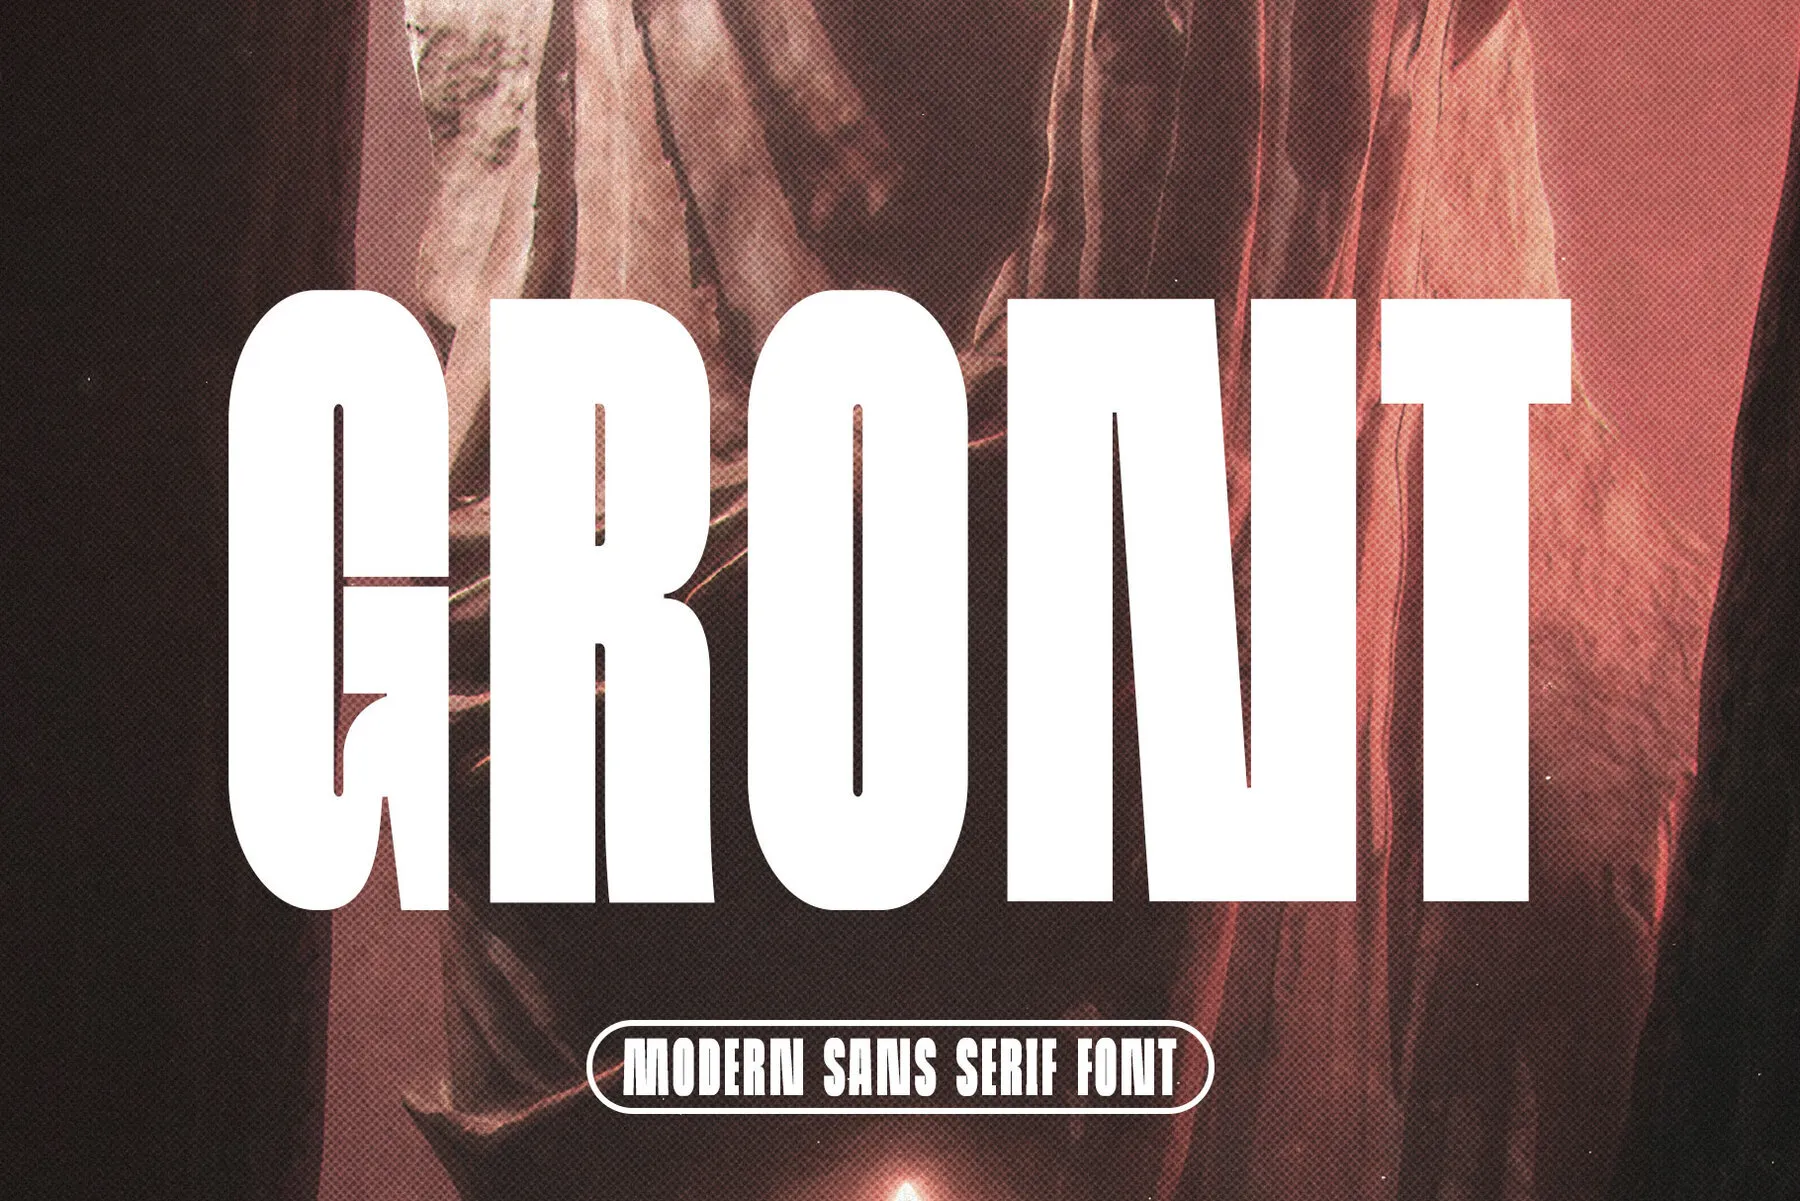 Gront